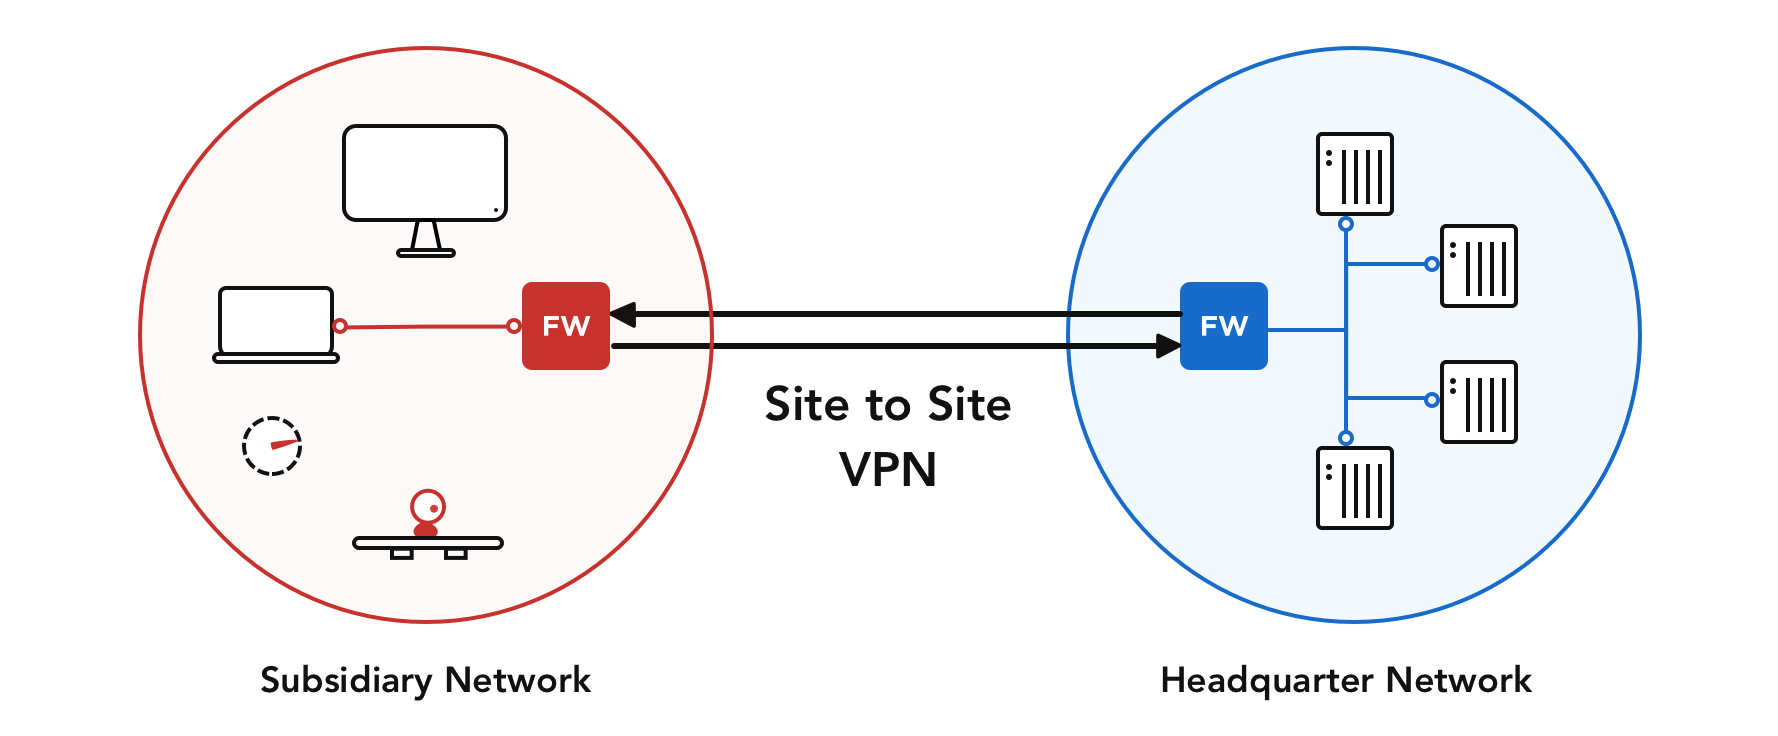 Diagram of a Site to Site VPN connection between a Subsidiary and Headquarter network